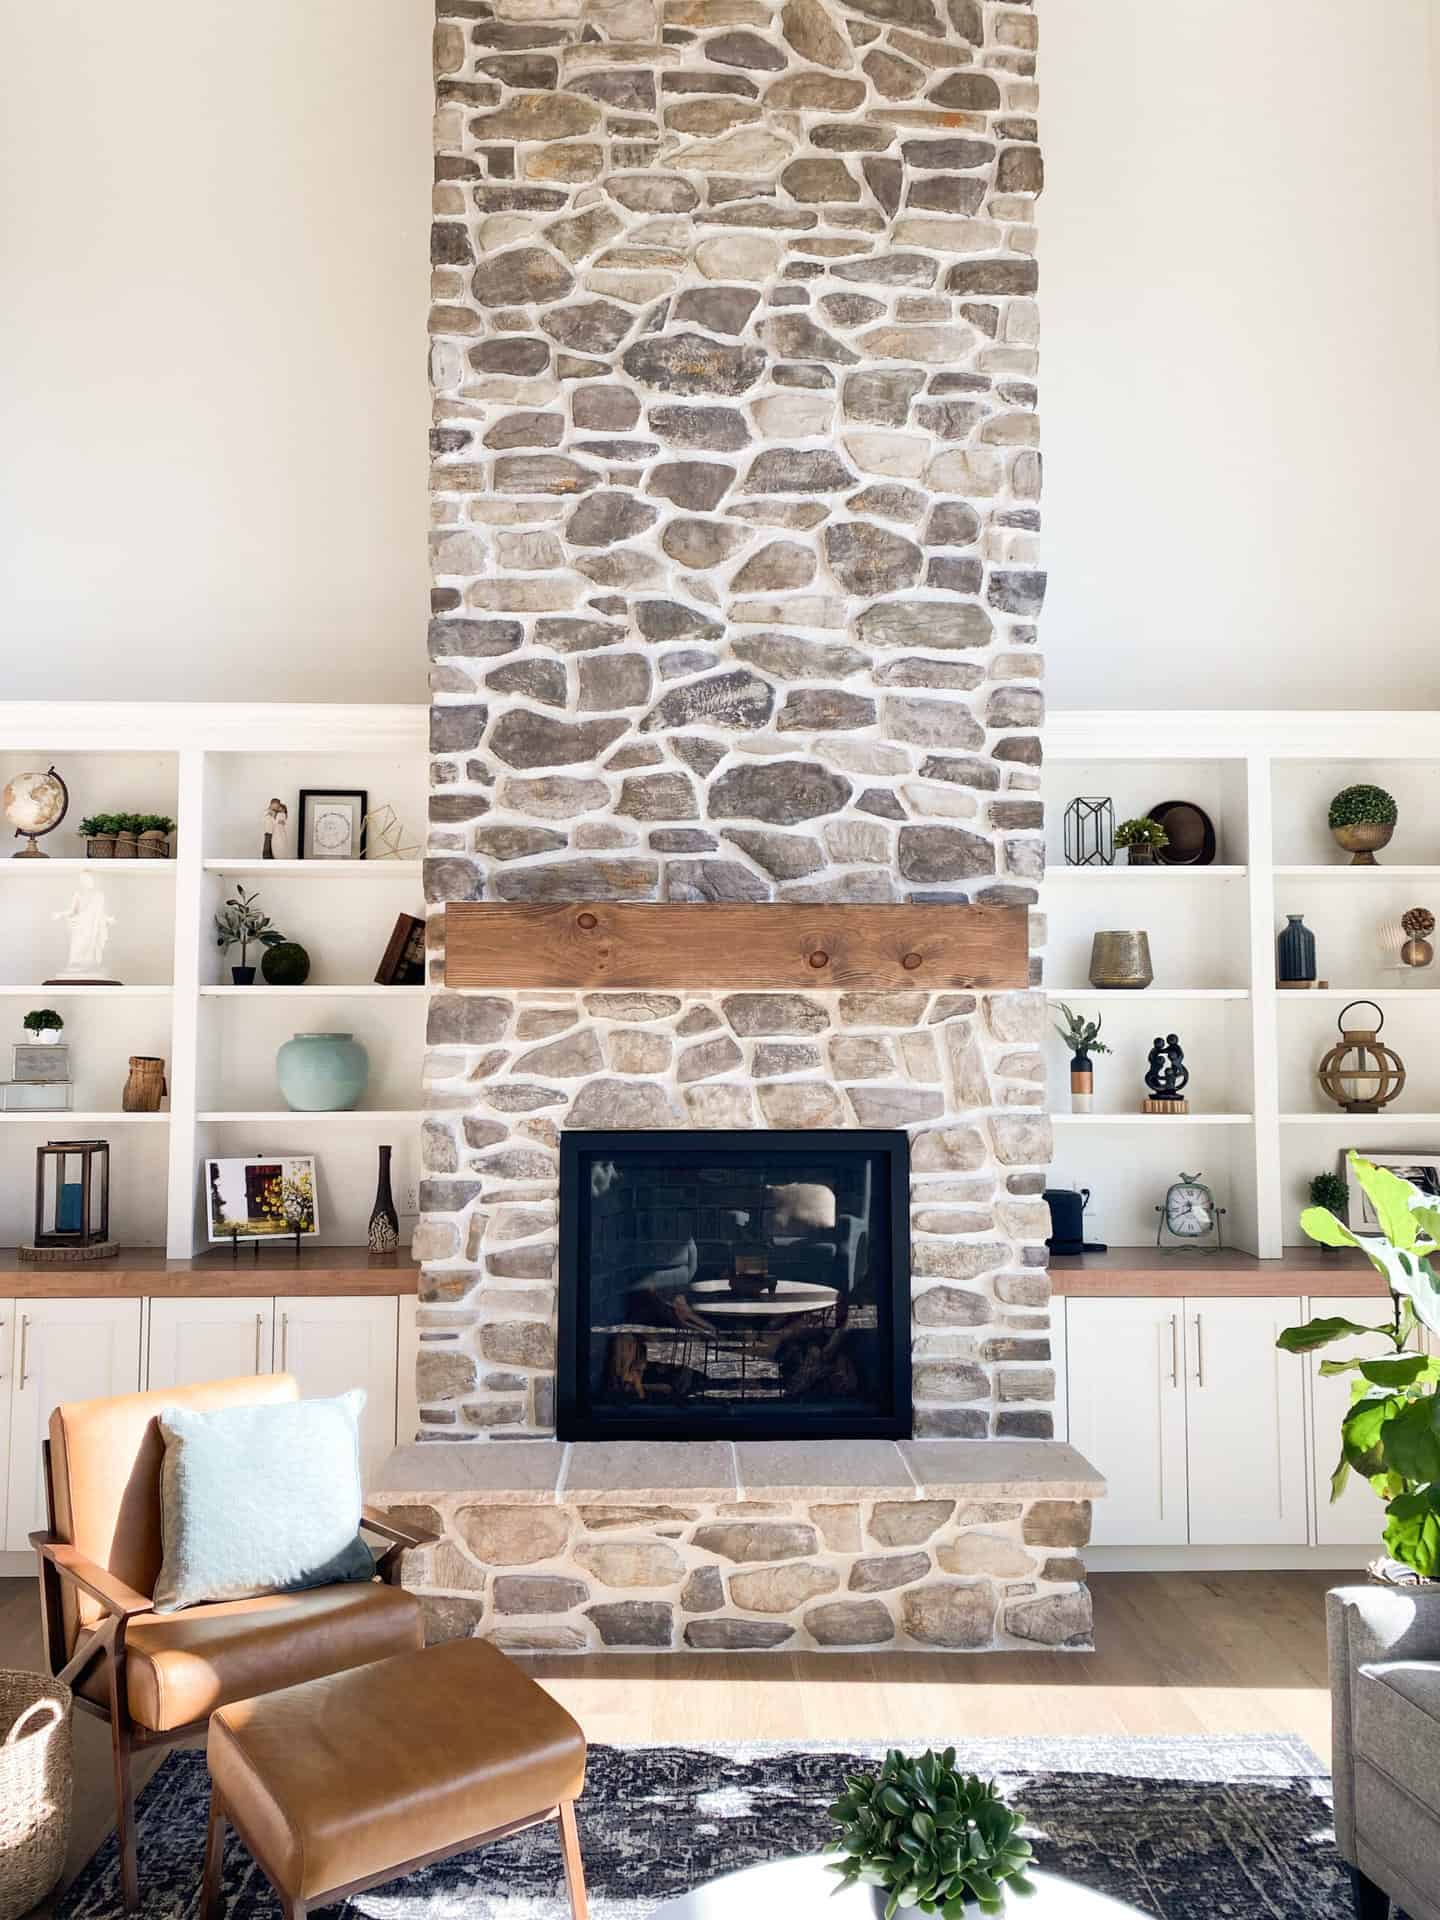 wooden shelves around fire place